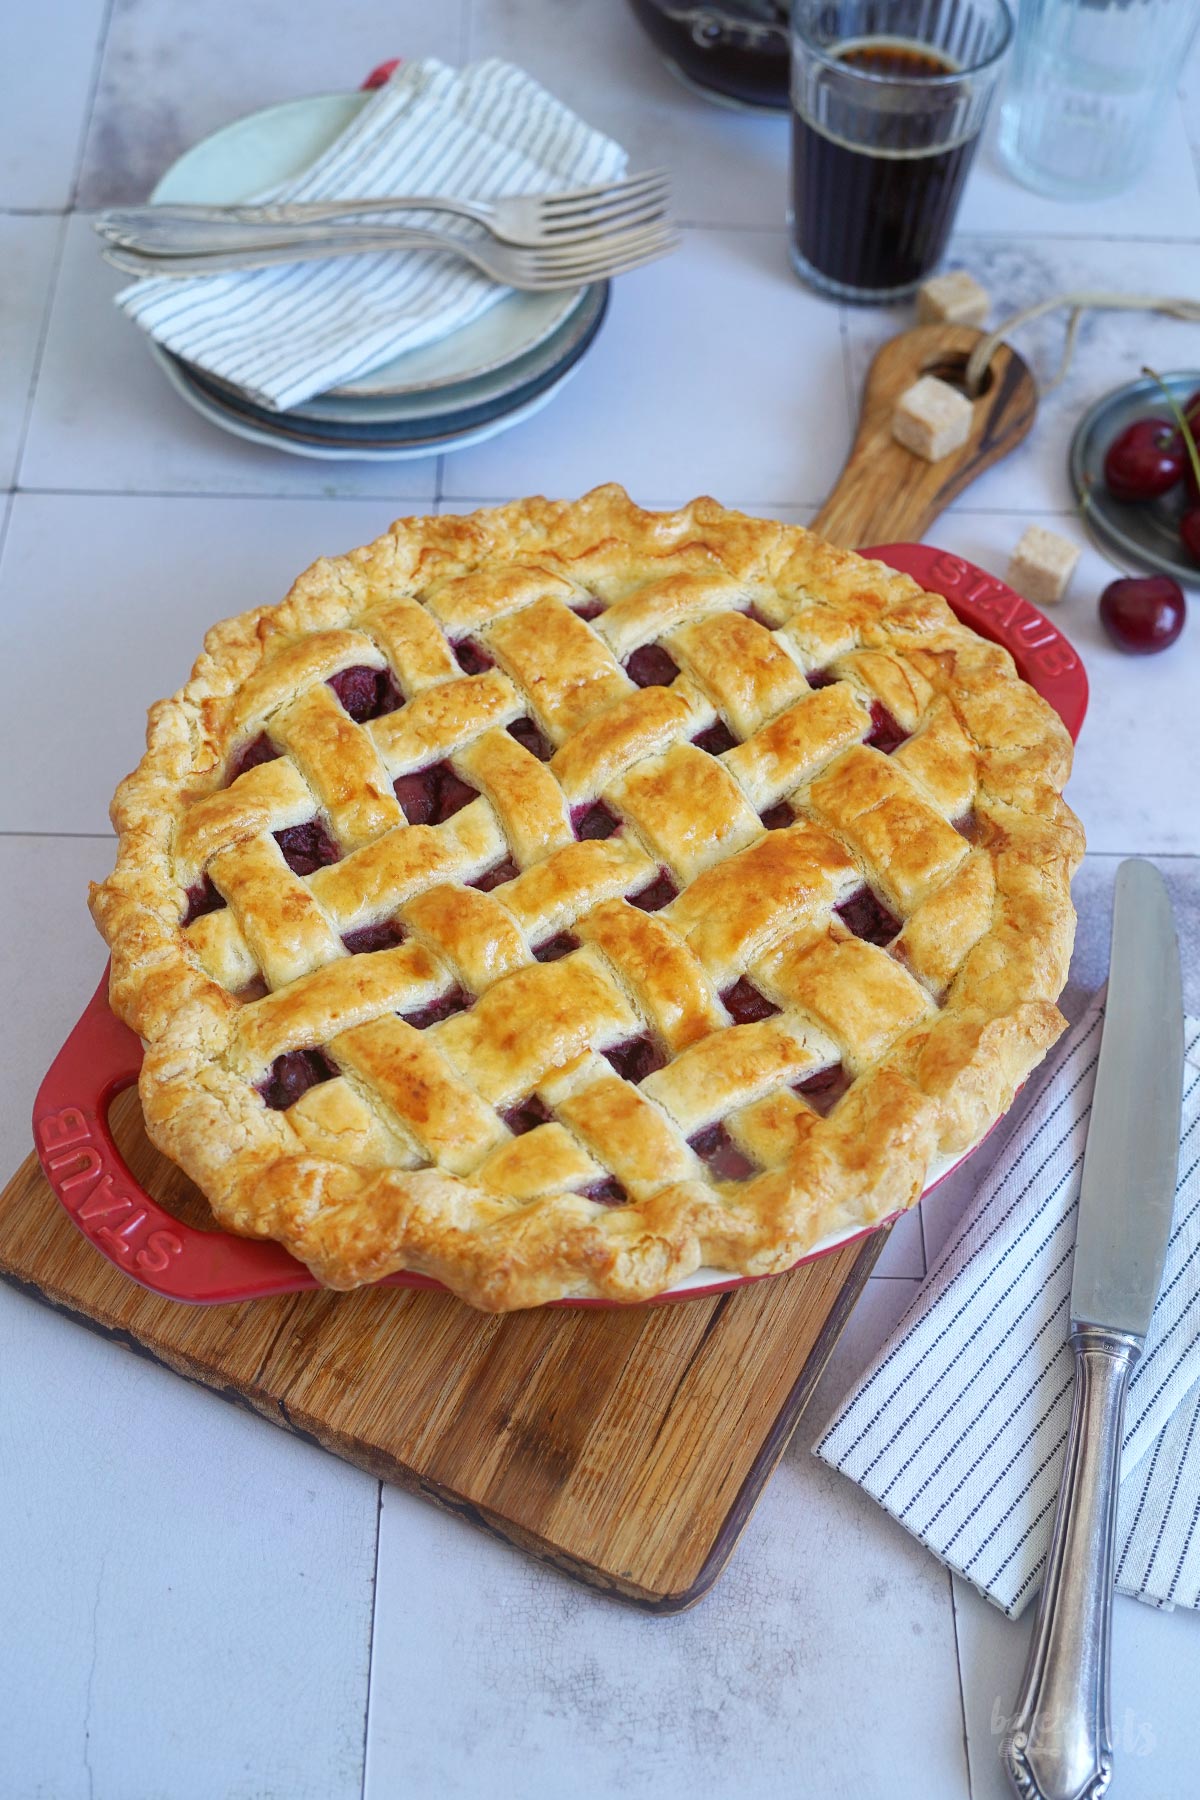 Homemade Cherry Pie | Bake to the roots